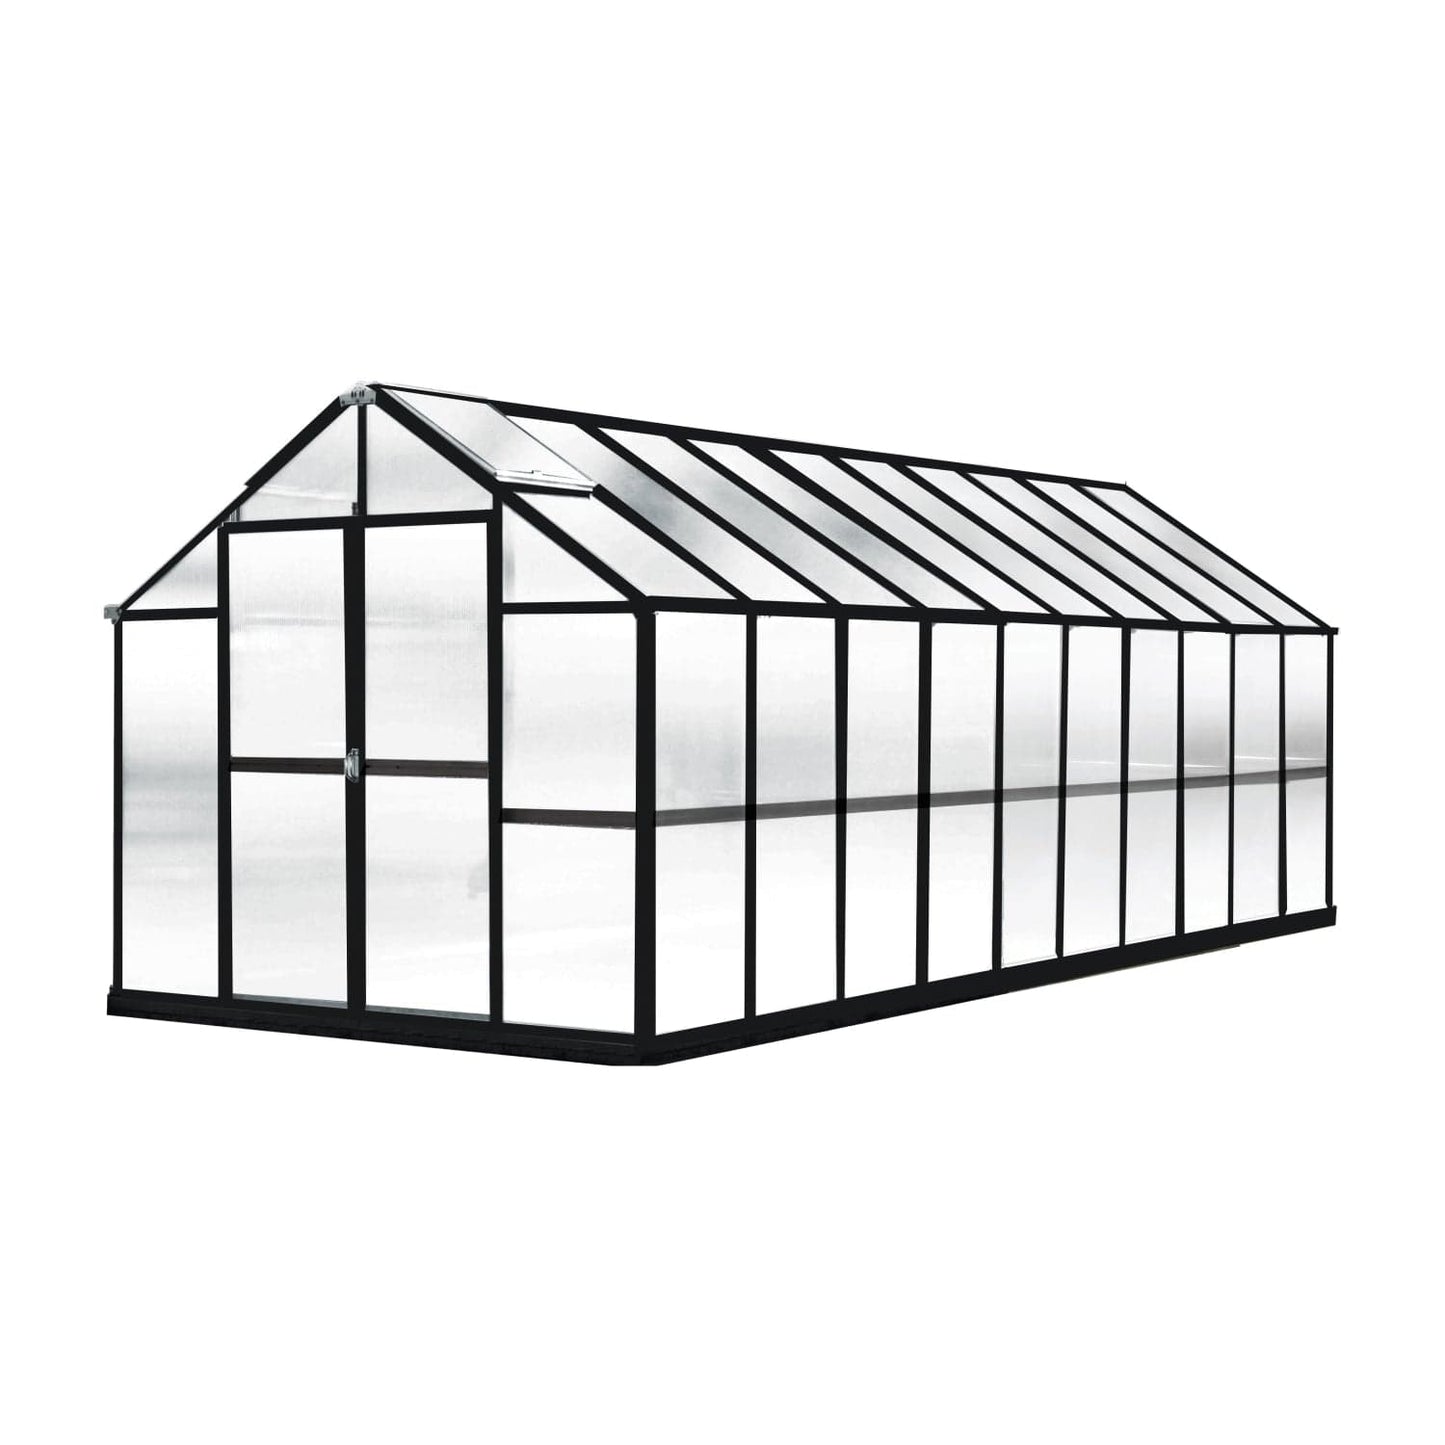 Riverstone Industries Deluxe Greenhouse Kit 20' x 8' x 7'6" Riverstone | MONT Growers Edition Greenhouse - Black Finish MONT-20-BK-GROWERS